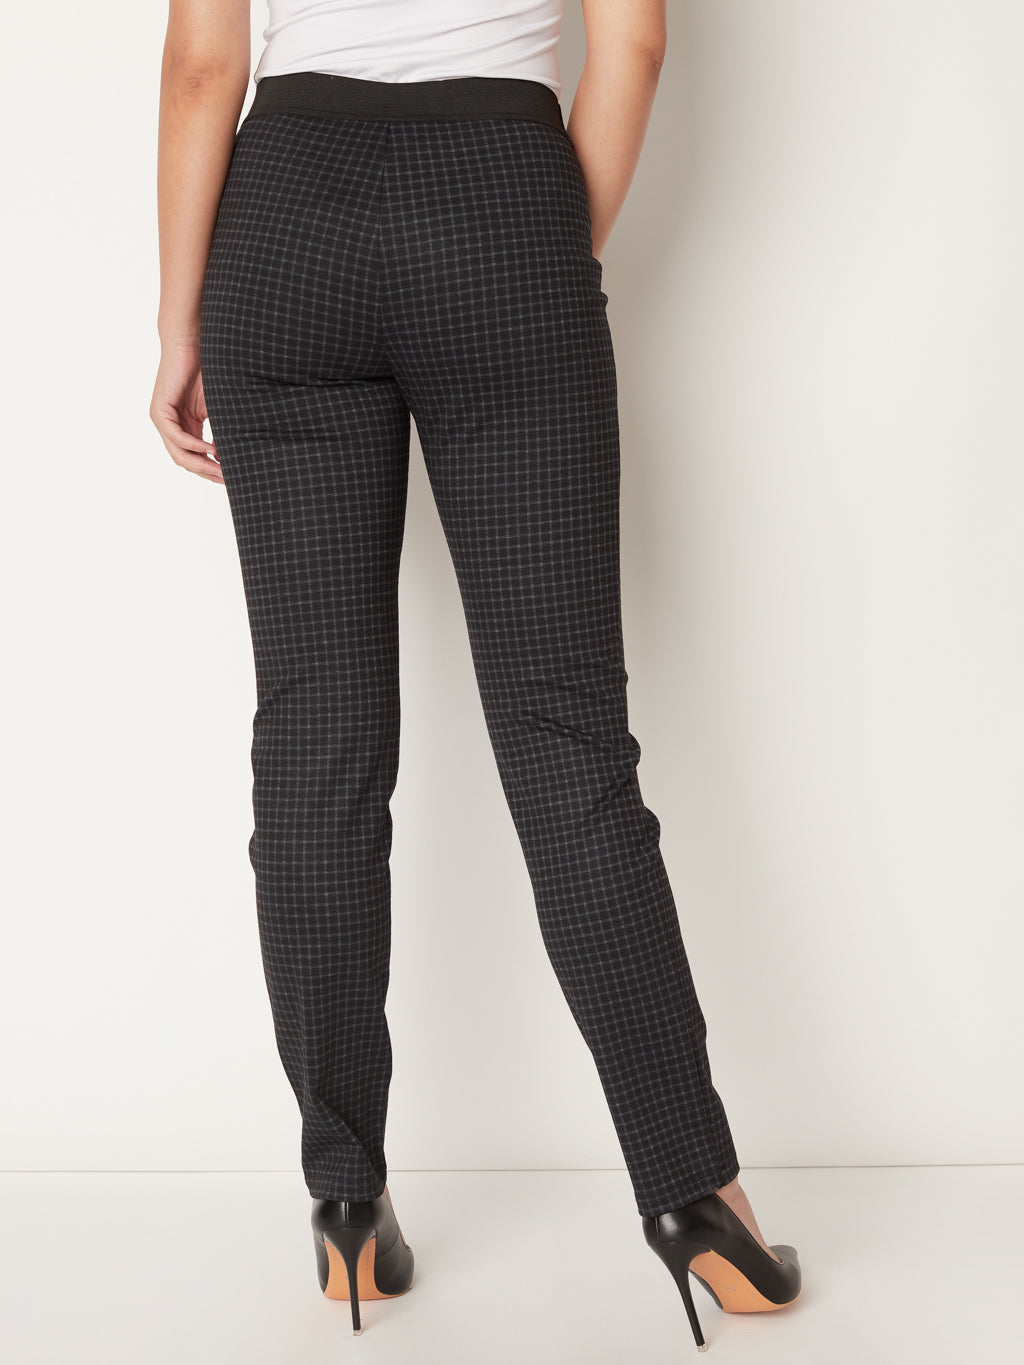 Narrow semi-fitted pull-on pant